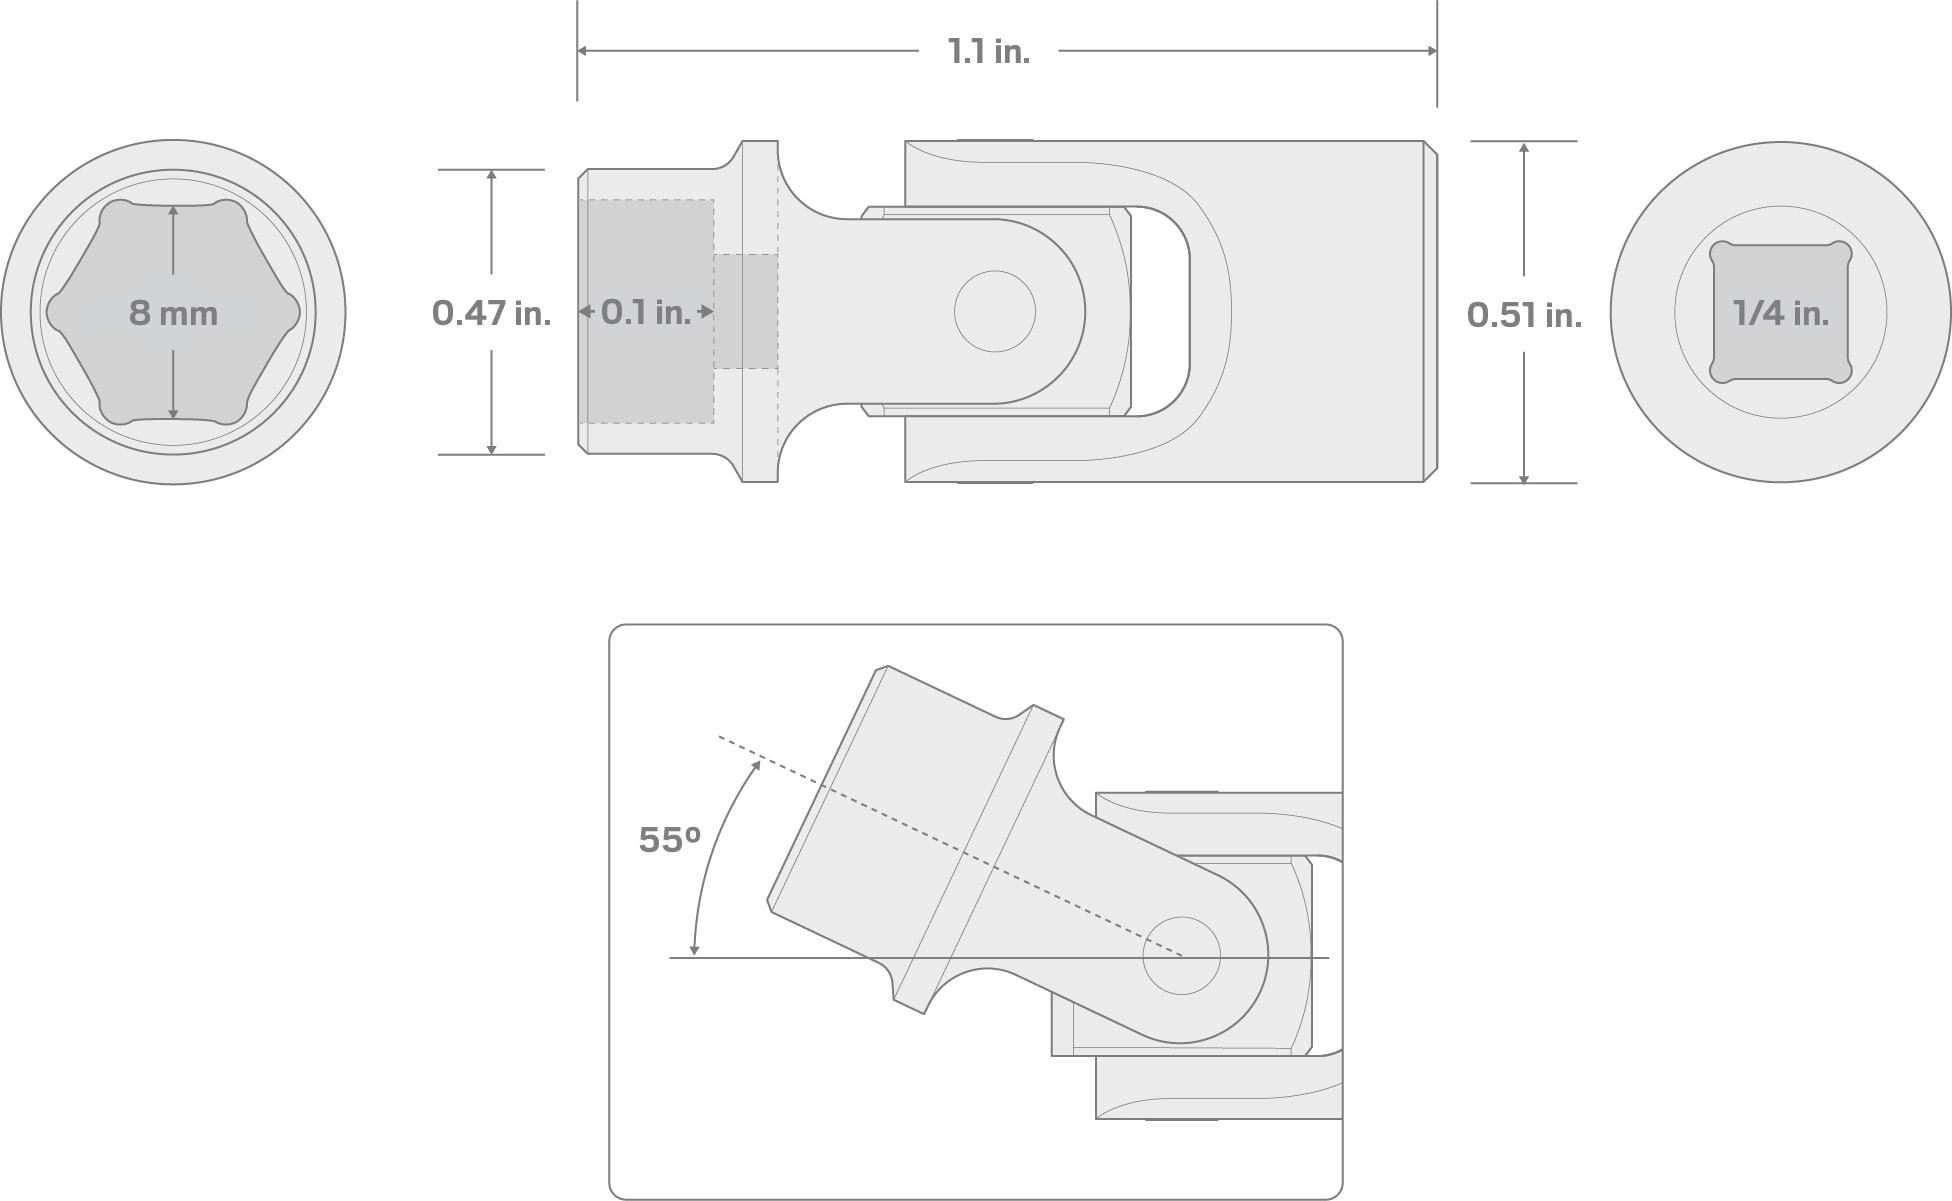 Specs for 1/4 Inch Drive x 8 mm Universal Joint Socket